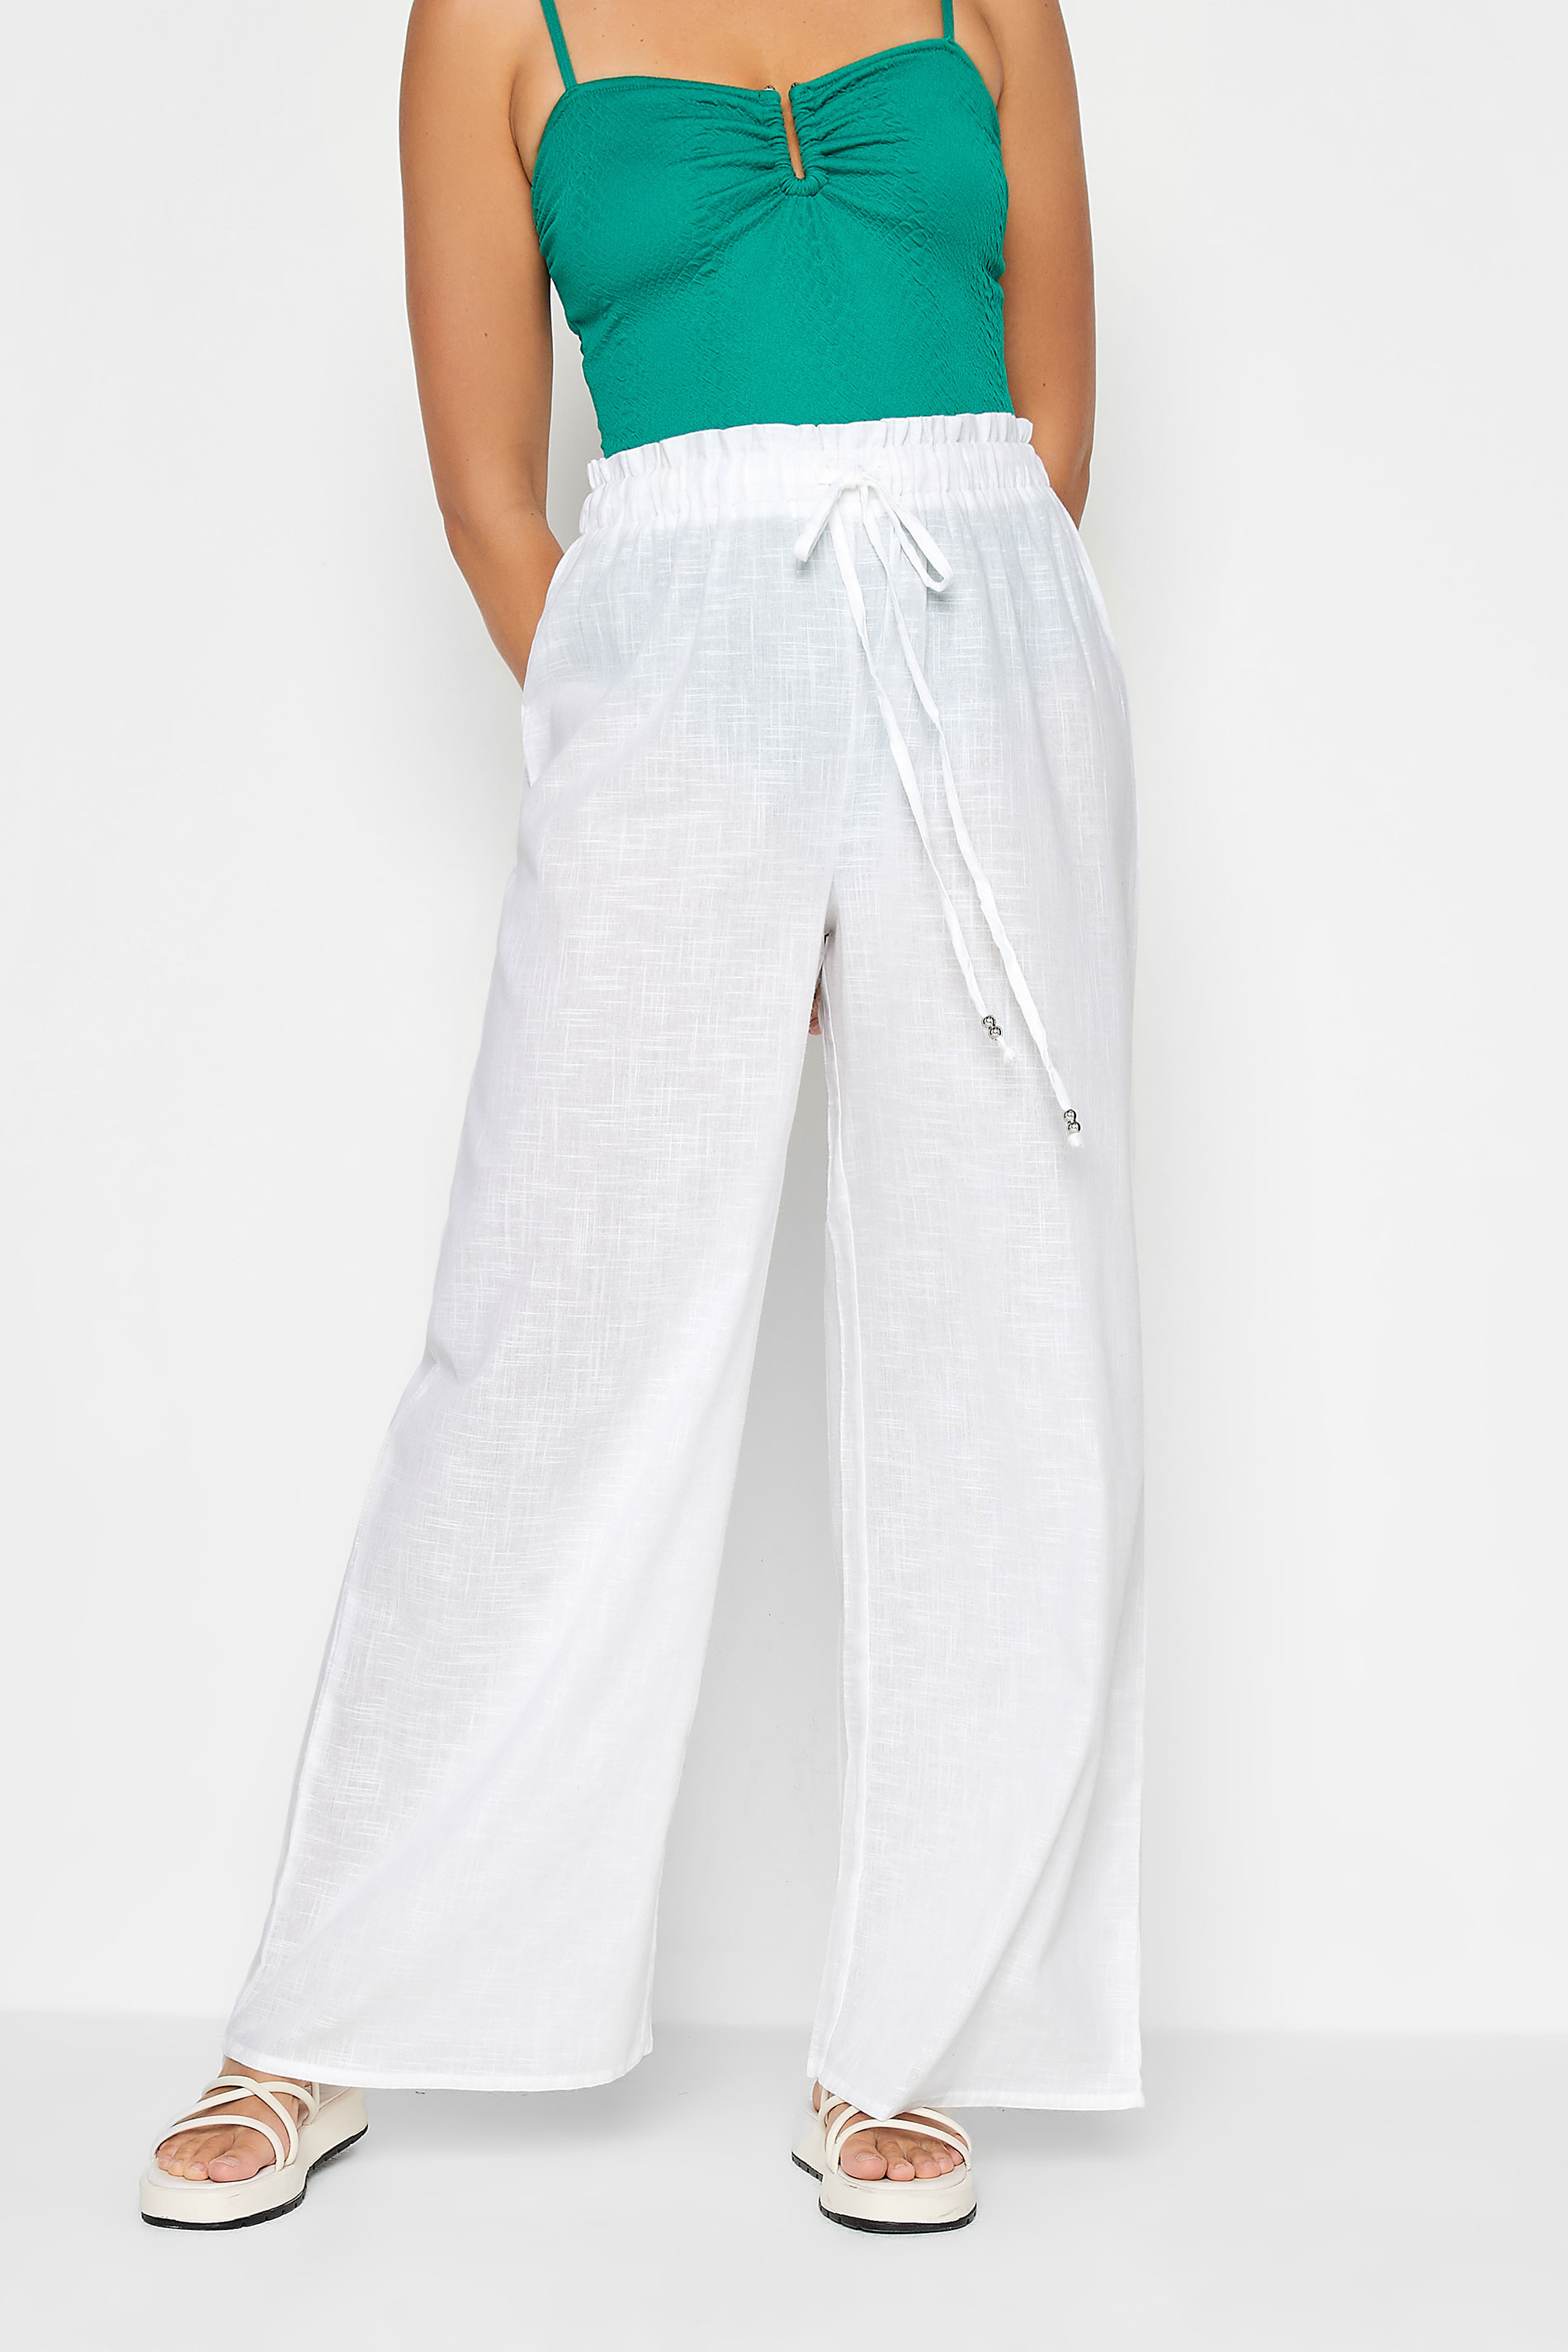 FREE PEOPLE Ivory White 100% Linen Relaxed Beach Trousers LARGE | eBay